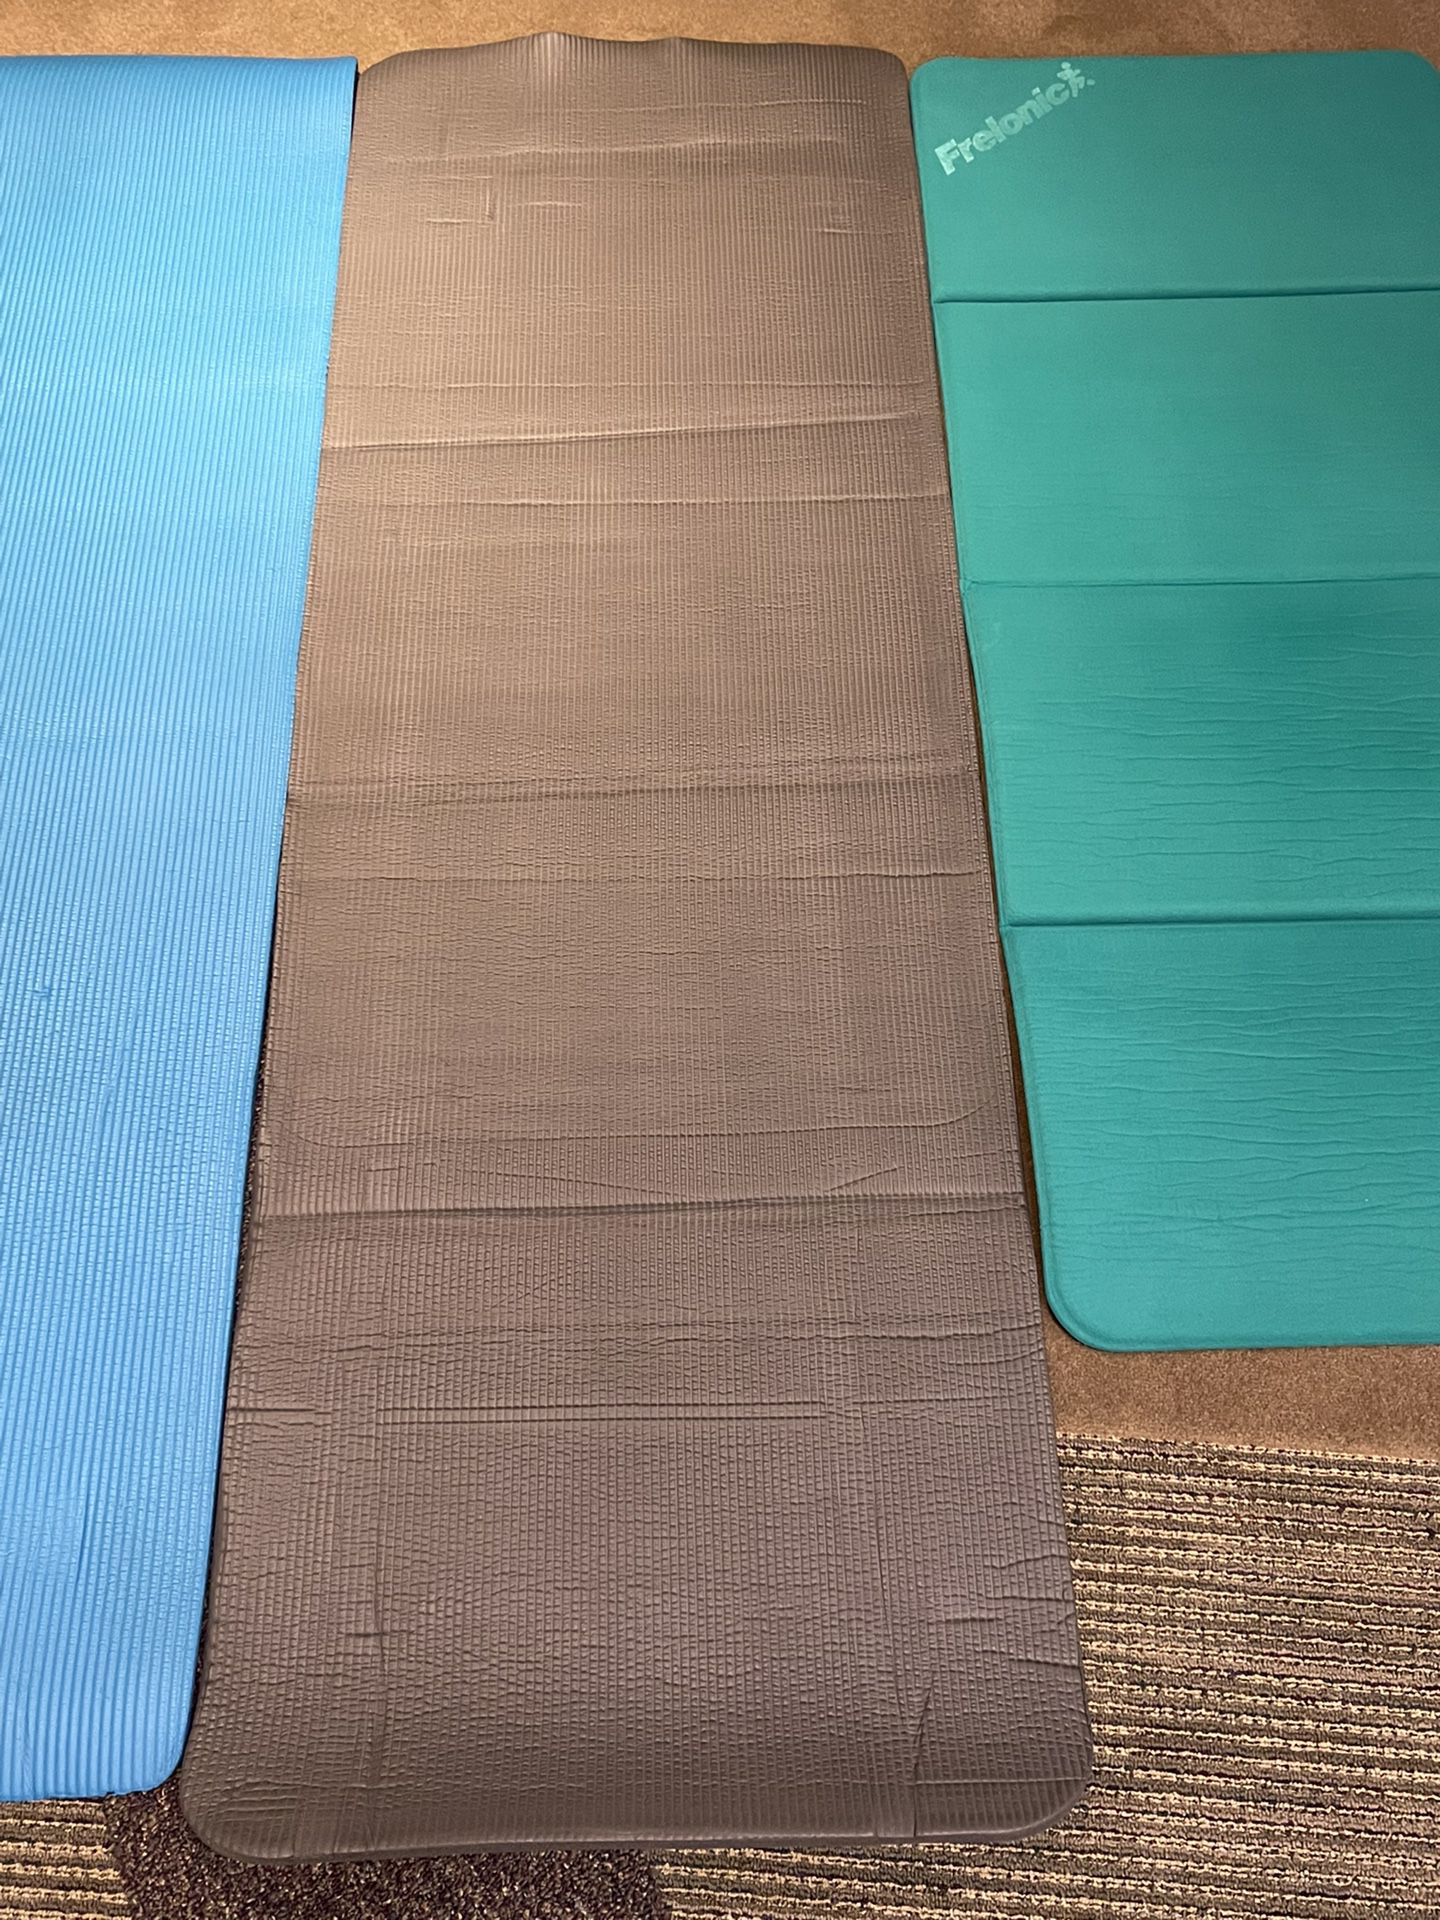 THREE (3) LARGE, THICK EXERCISE / WORKOUT / YOGA MATS - price for ALL THREE (3) TOGETHER is firm